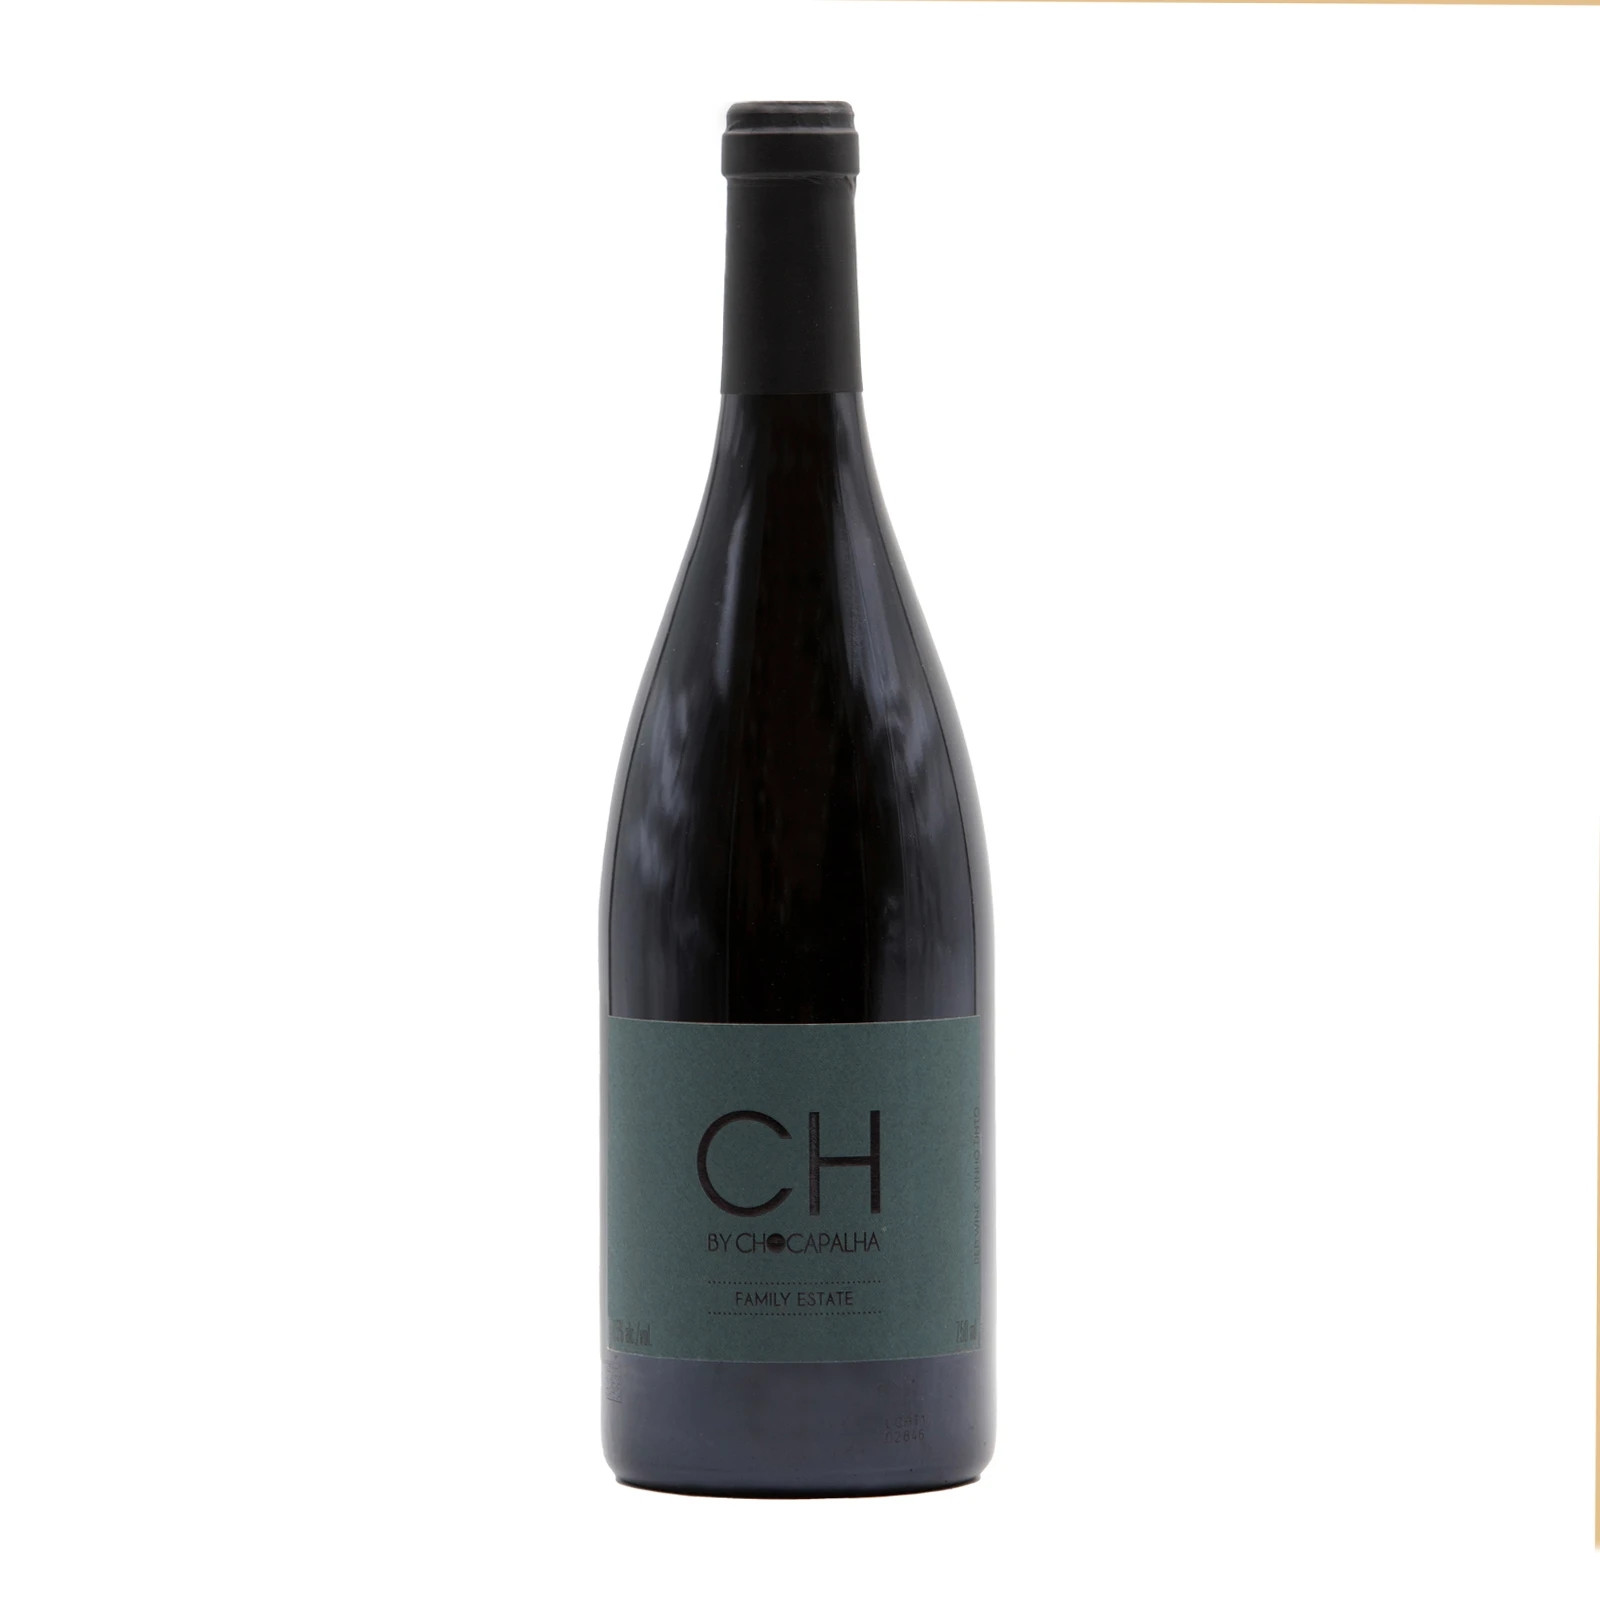 Ch By Chocapalha Tinto 2019